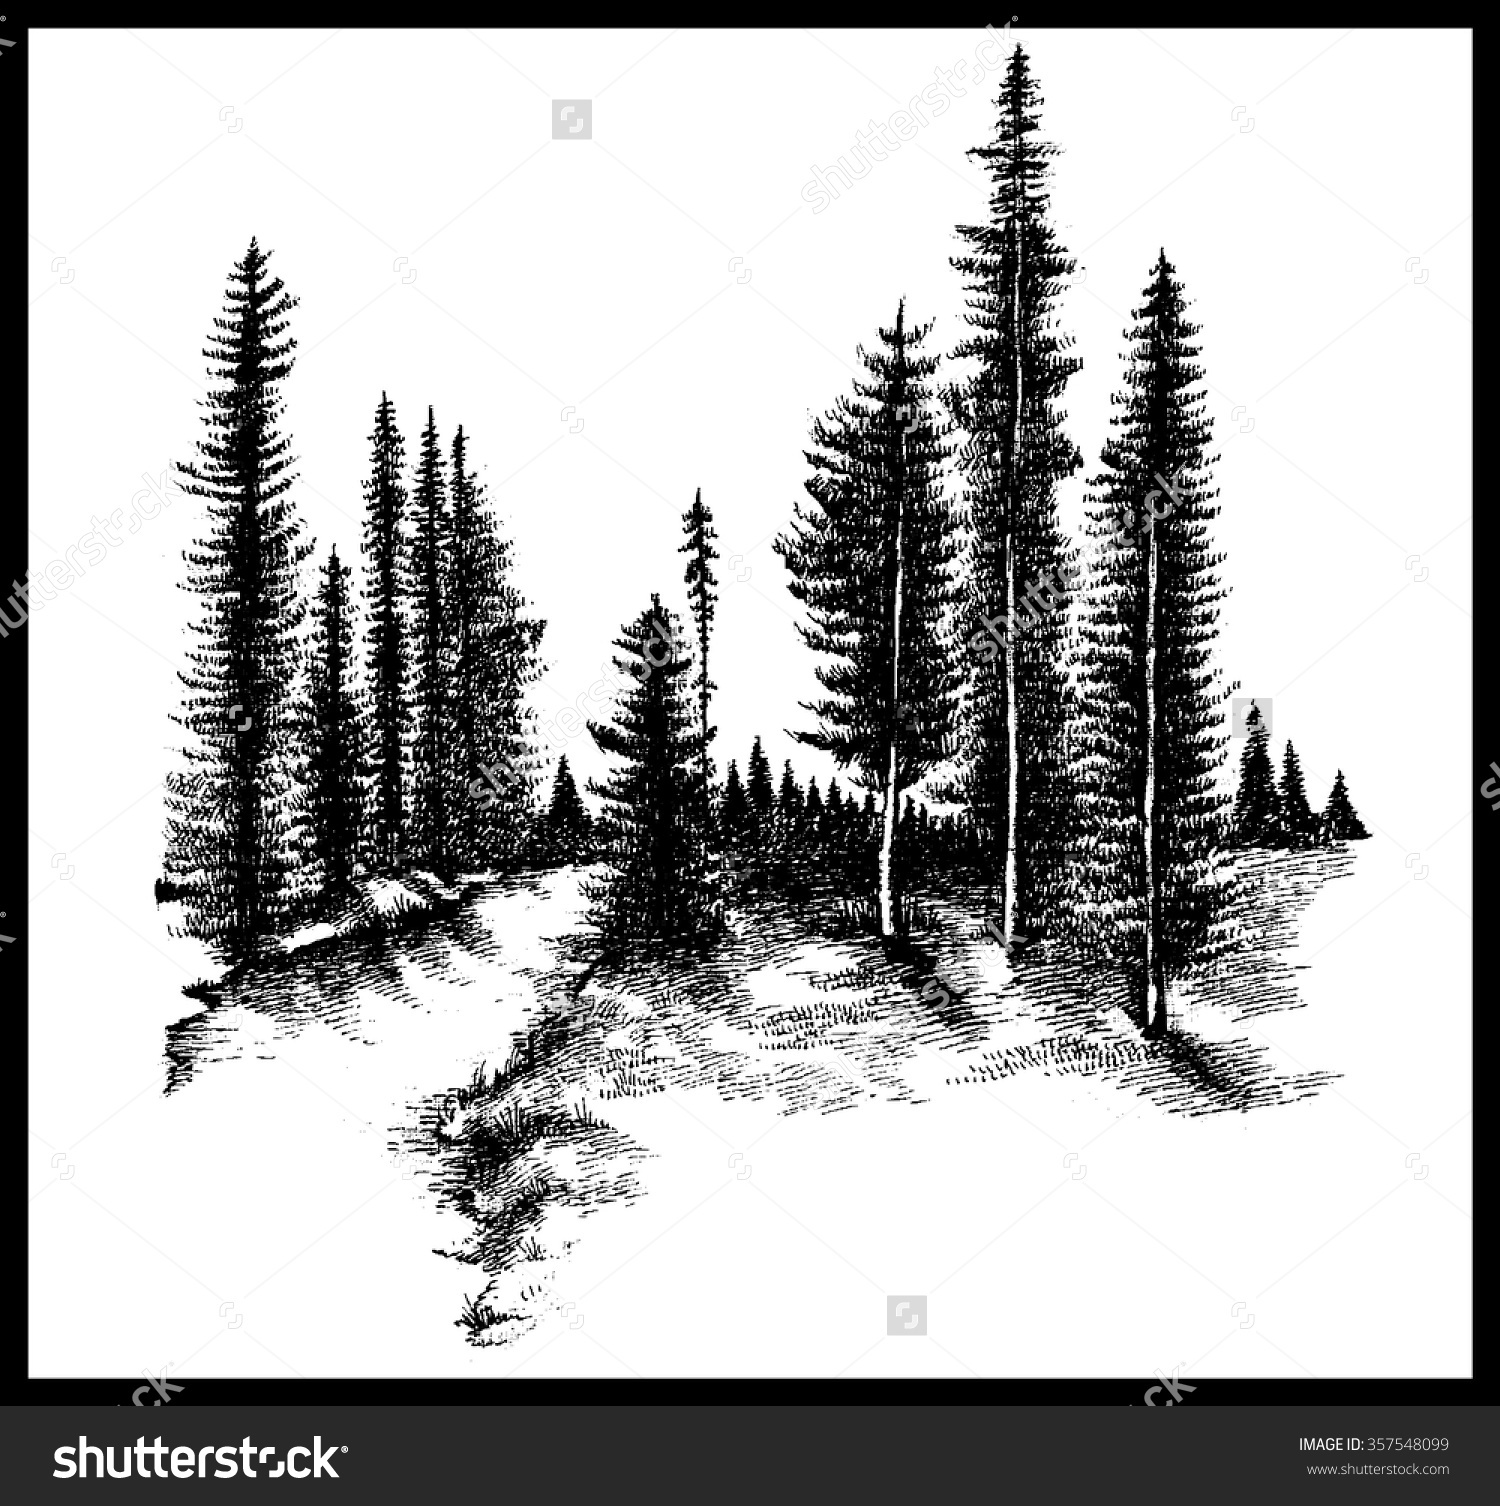 Free Tree Line Silhouette Tattoo, Download Free Tree Line Silhouette Tattoo png images, Free ClipArts on Clipart Library